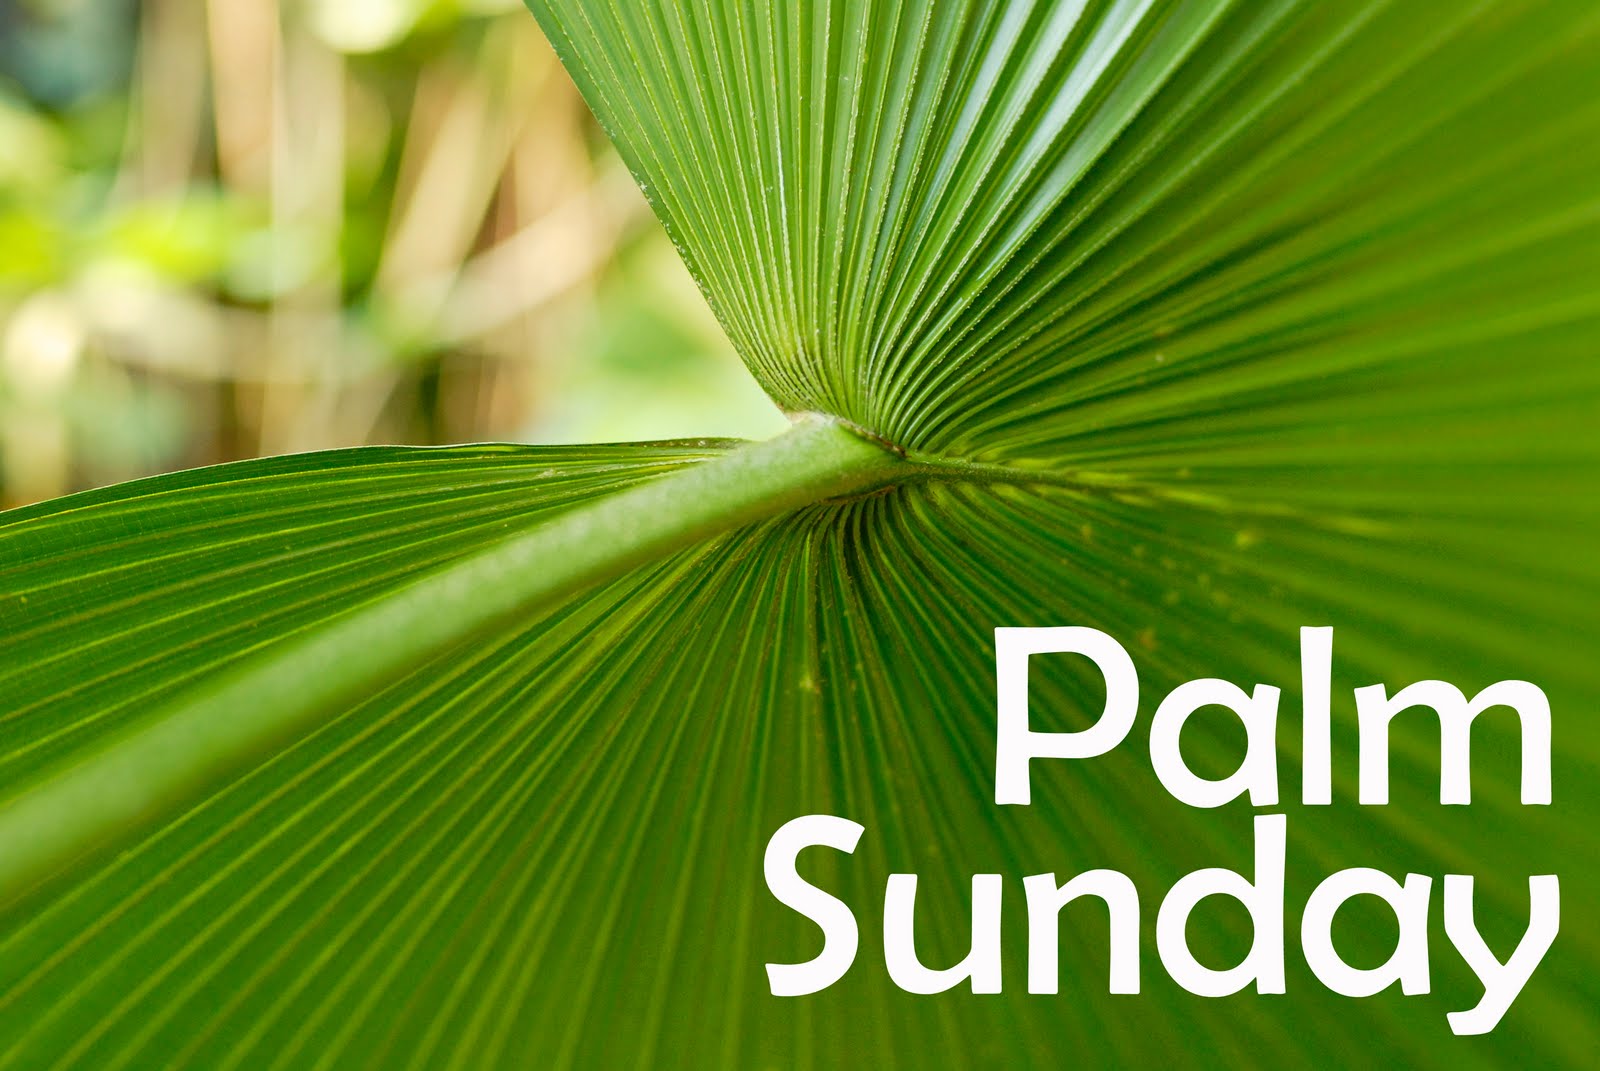 Picturespool Palm Sunday Greetings Wallpaper